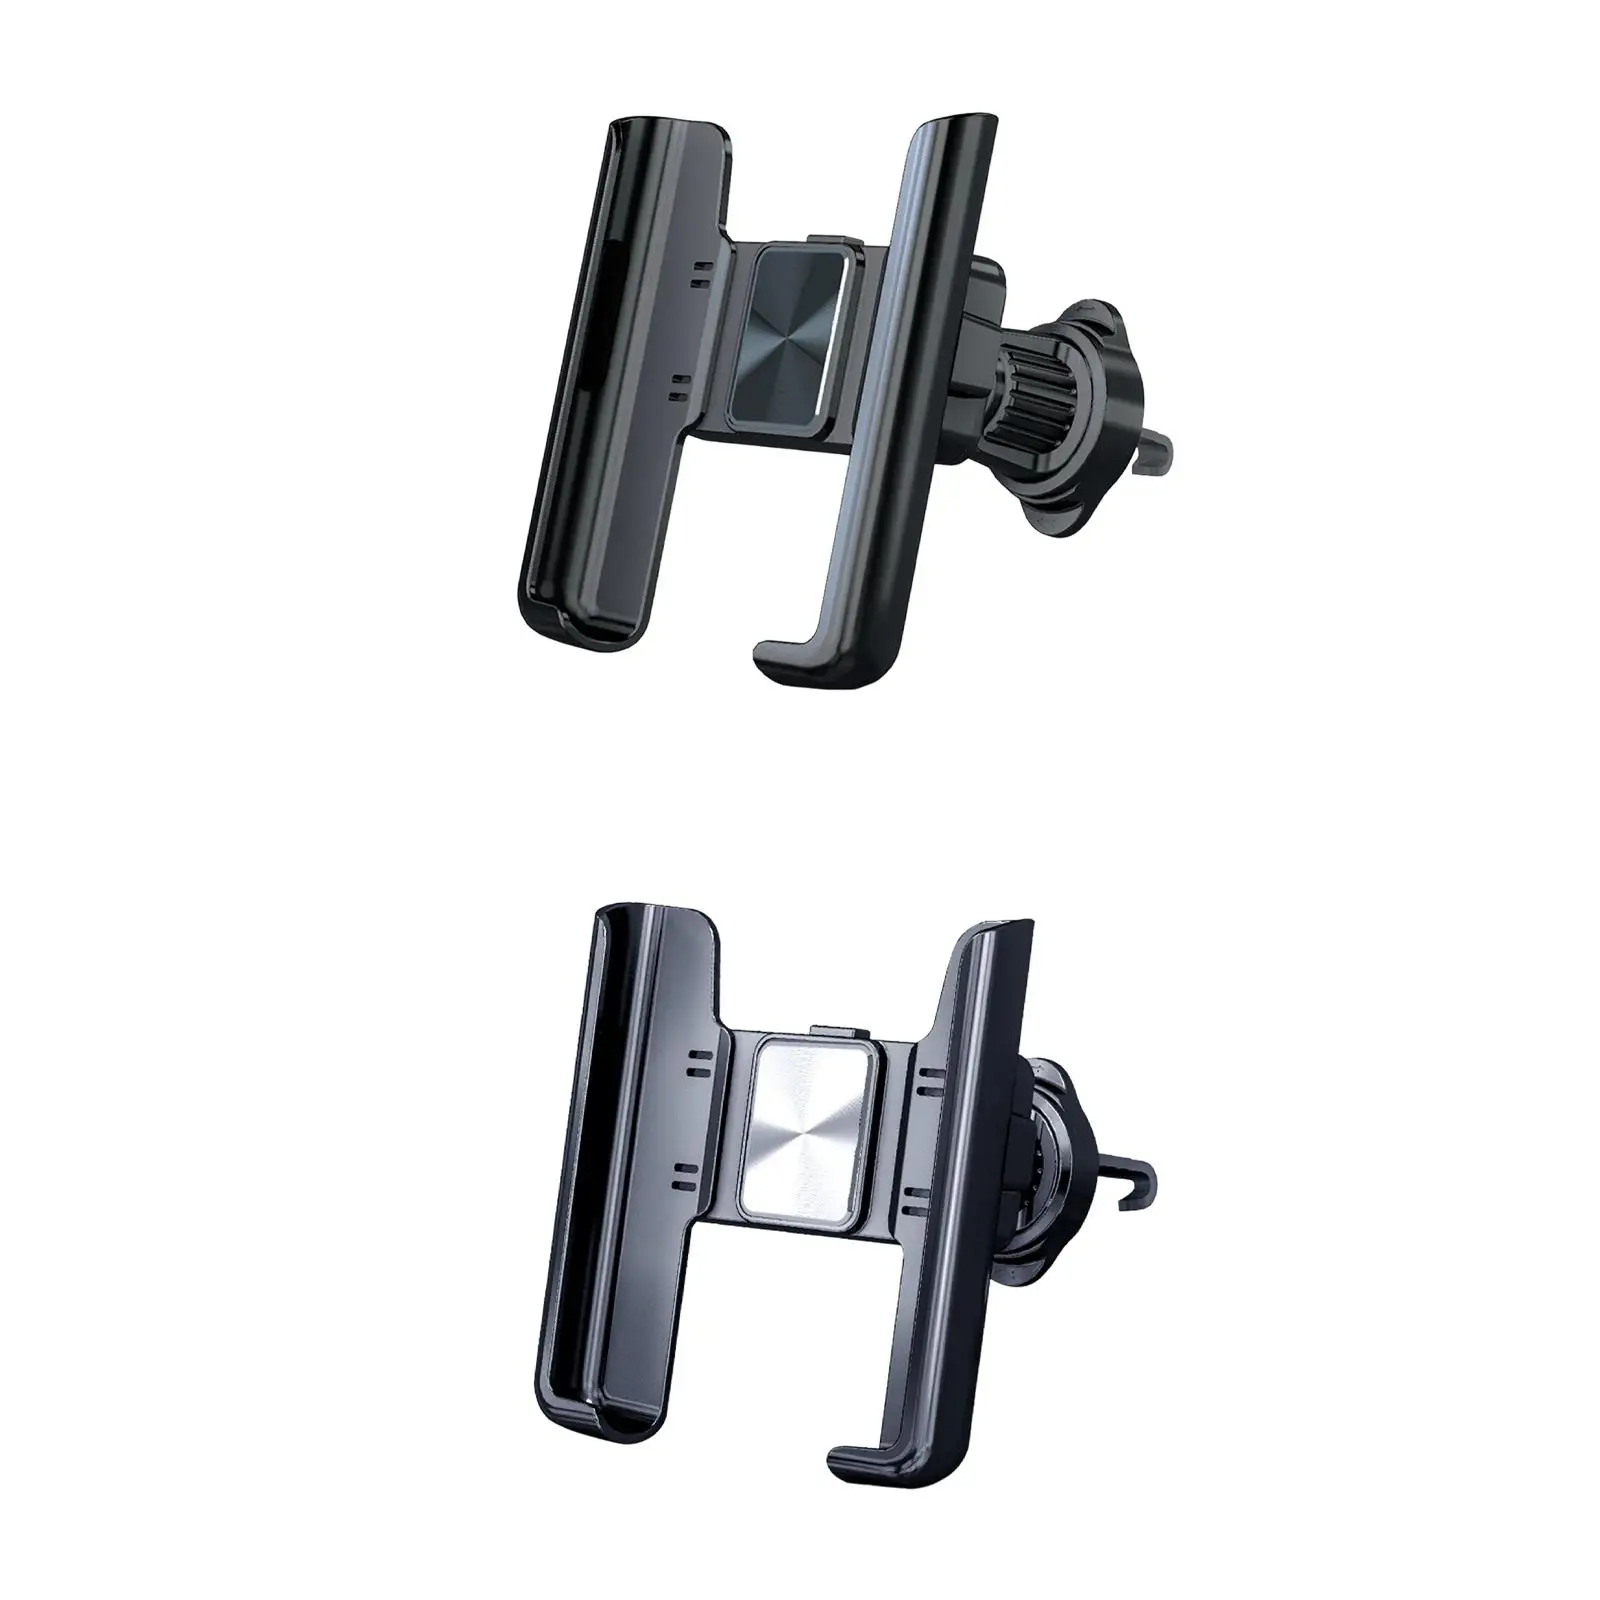 Air Vent Telescopic Hook Car Phone Holder Mount Support Bracket for Most Phones for Trucks